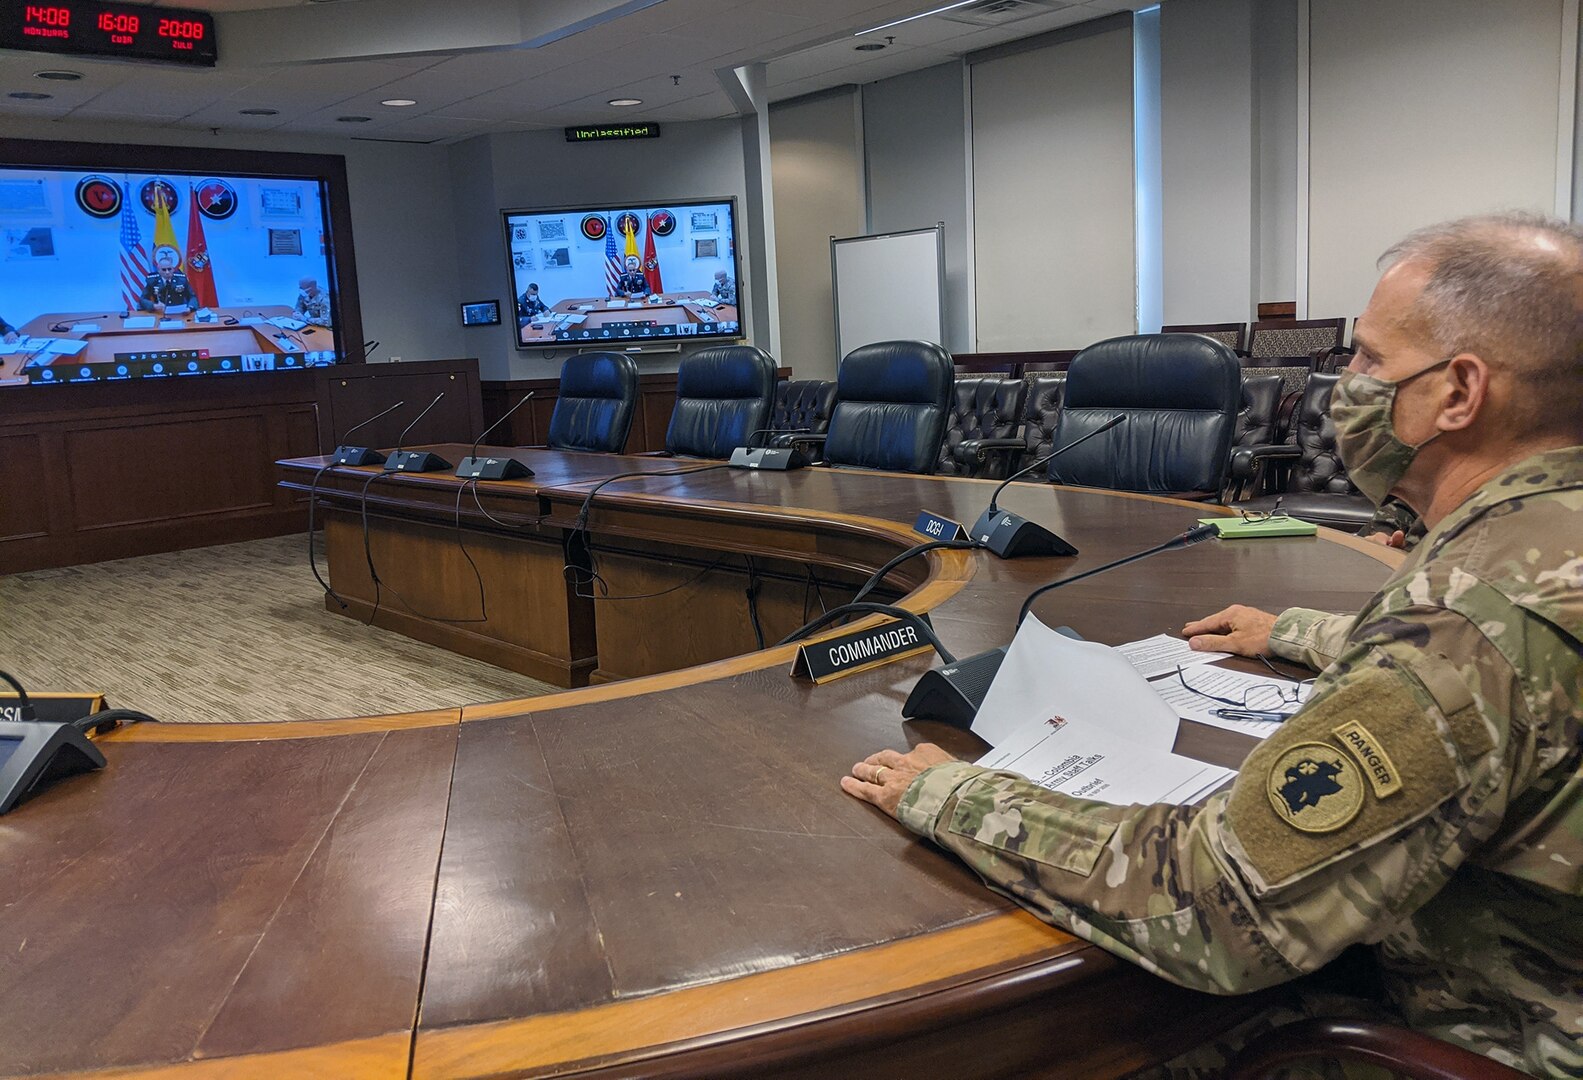 Maj. Gen. Daniel Walrath, U.S. Army South commanding general, provides closing remark to Gen. Eduardo E. Zapateiro, Colombian National Army commanding general, during the conclusion of the 11th U.S. – Colombia Bilateral Army Staff Talks, which was held virtually from Sept. 14-18. The staff talks seeks to promote bilateral efforts in order to develop professional partnerships and increase interaction between partner nation armies over a five-year plan.